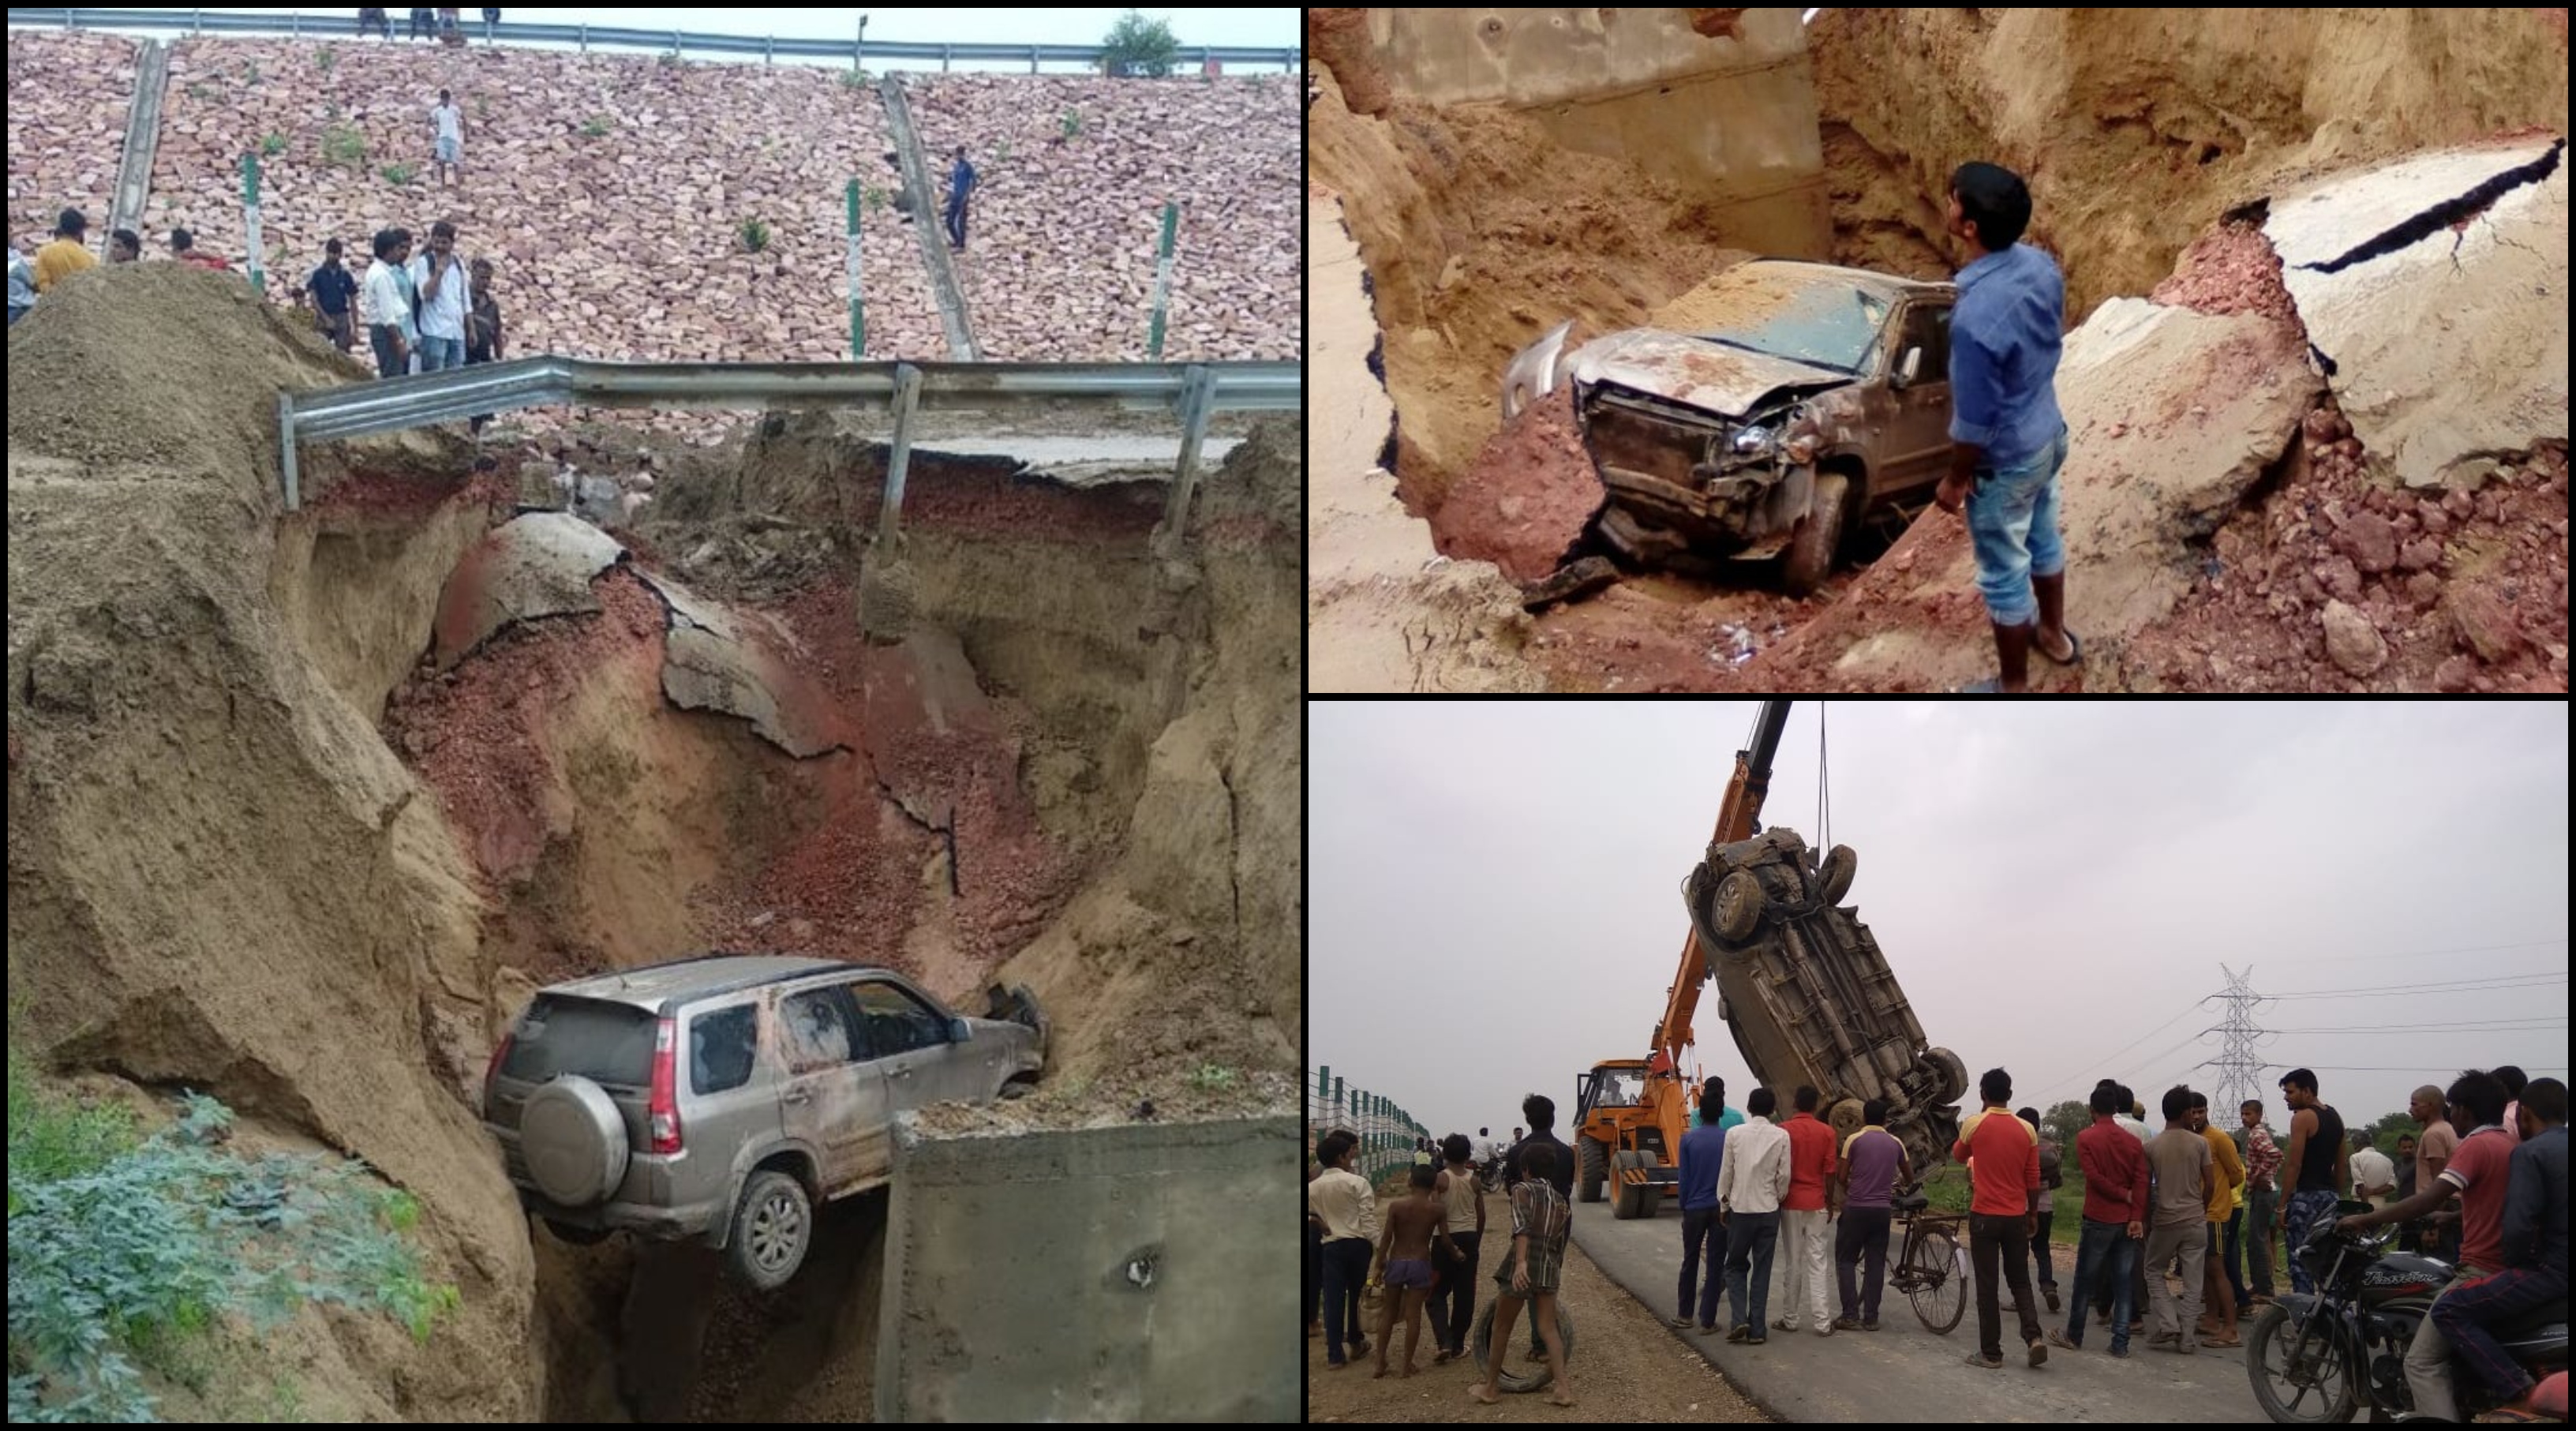 lucknow agra-expressway-service-road-car-deep-ditch at-50-feet